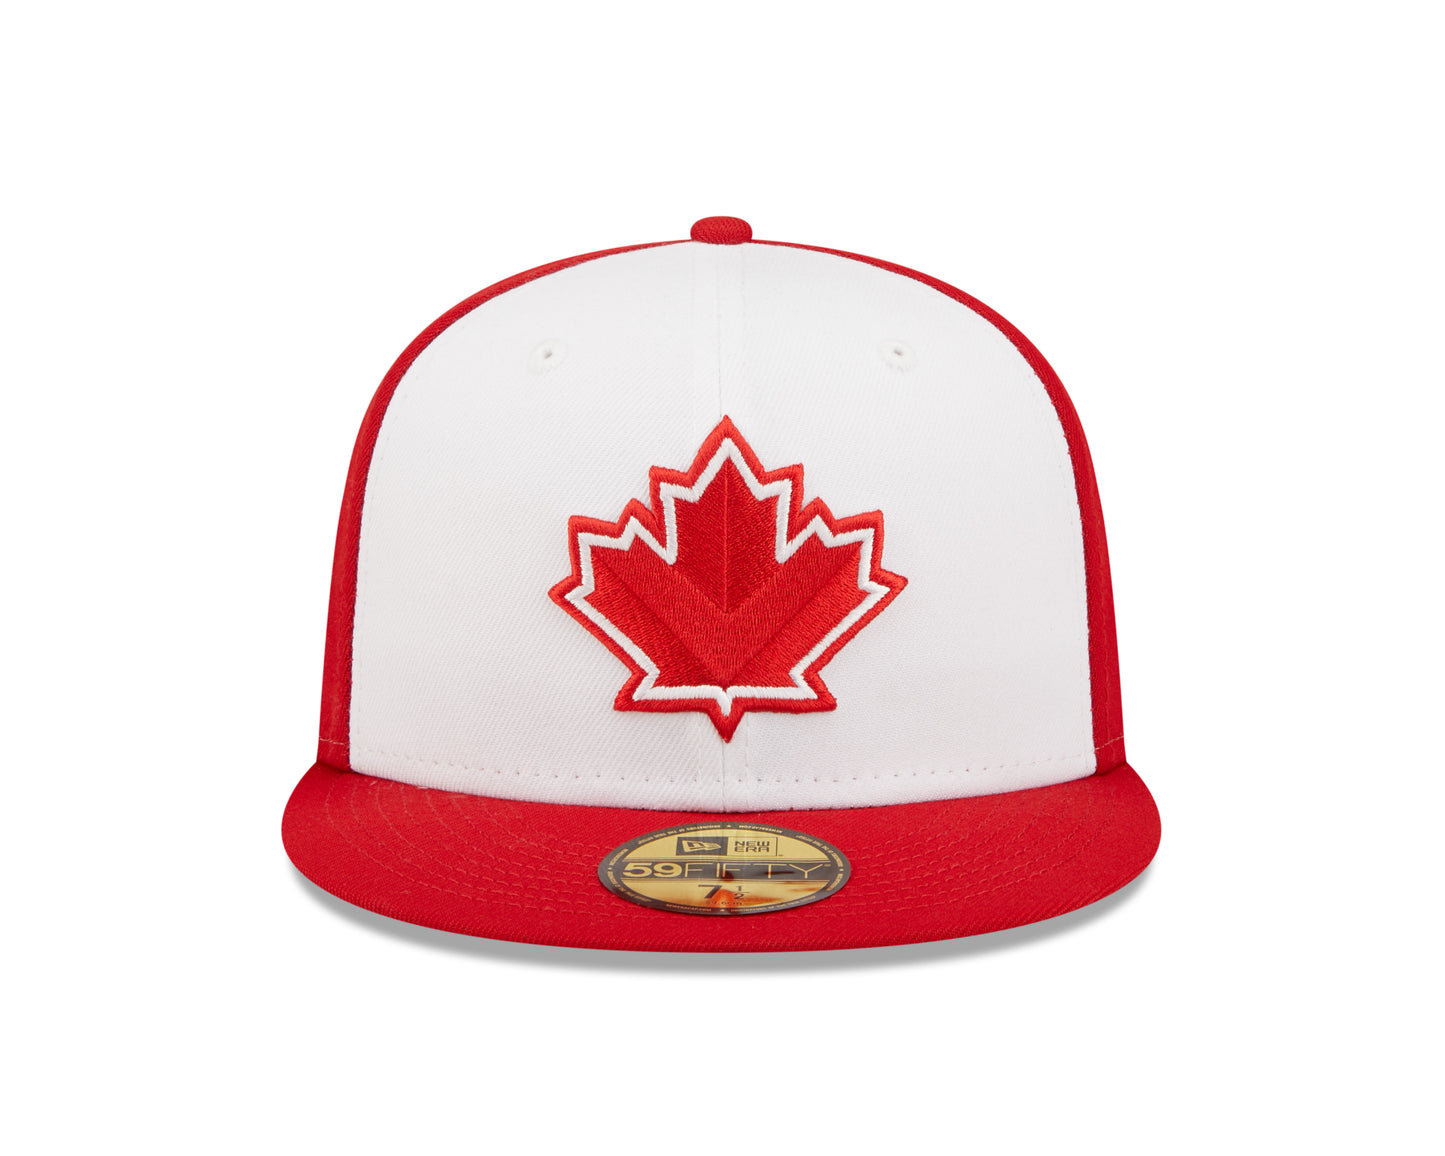 New Era - 59fifty Fitted - MiLB - AC Perf - Vancouver Canadians - White/Red - Headz Up 